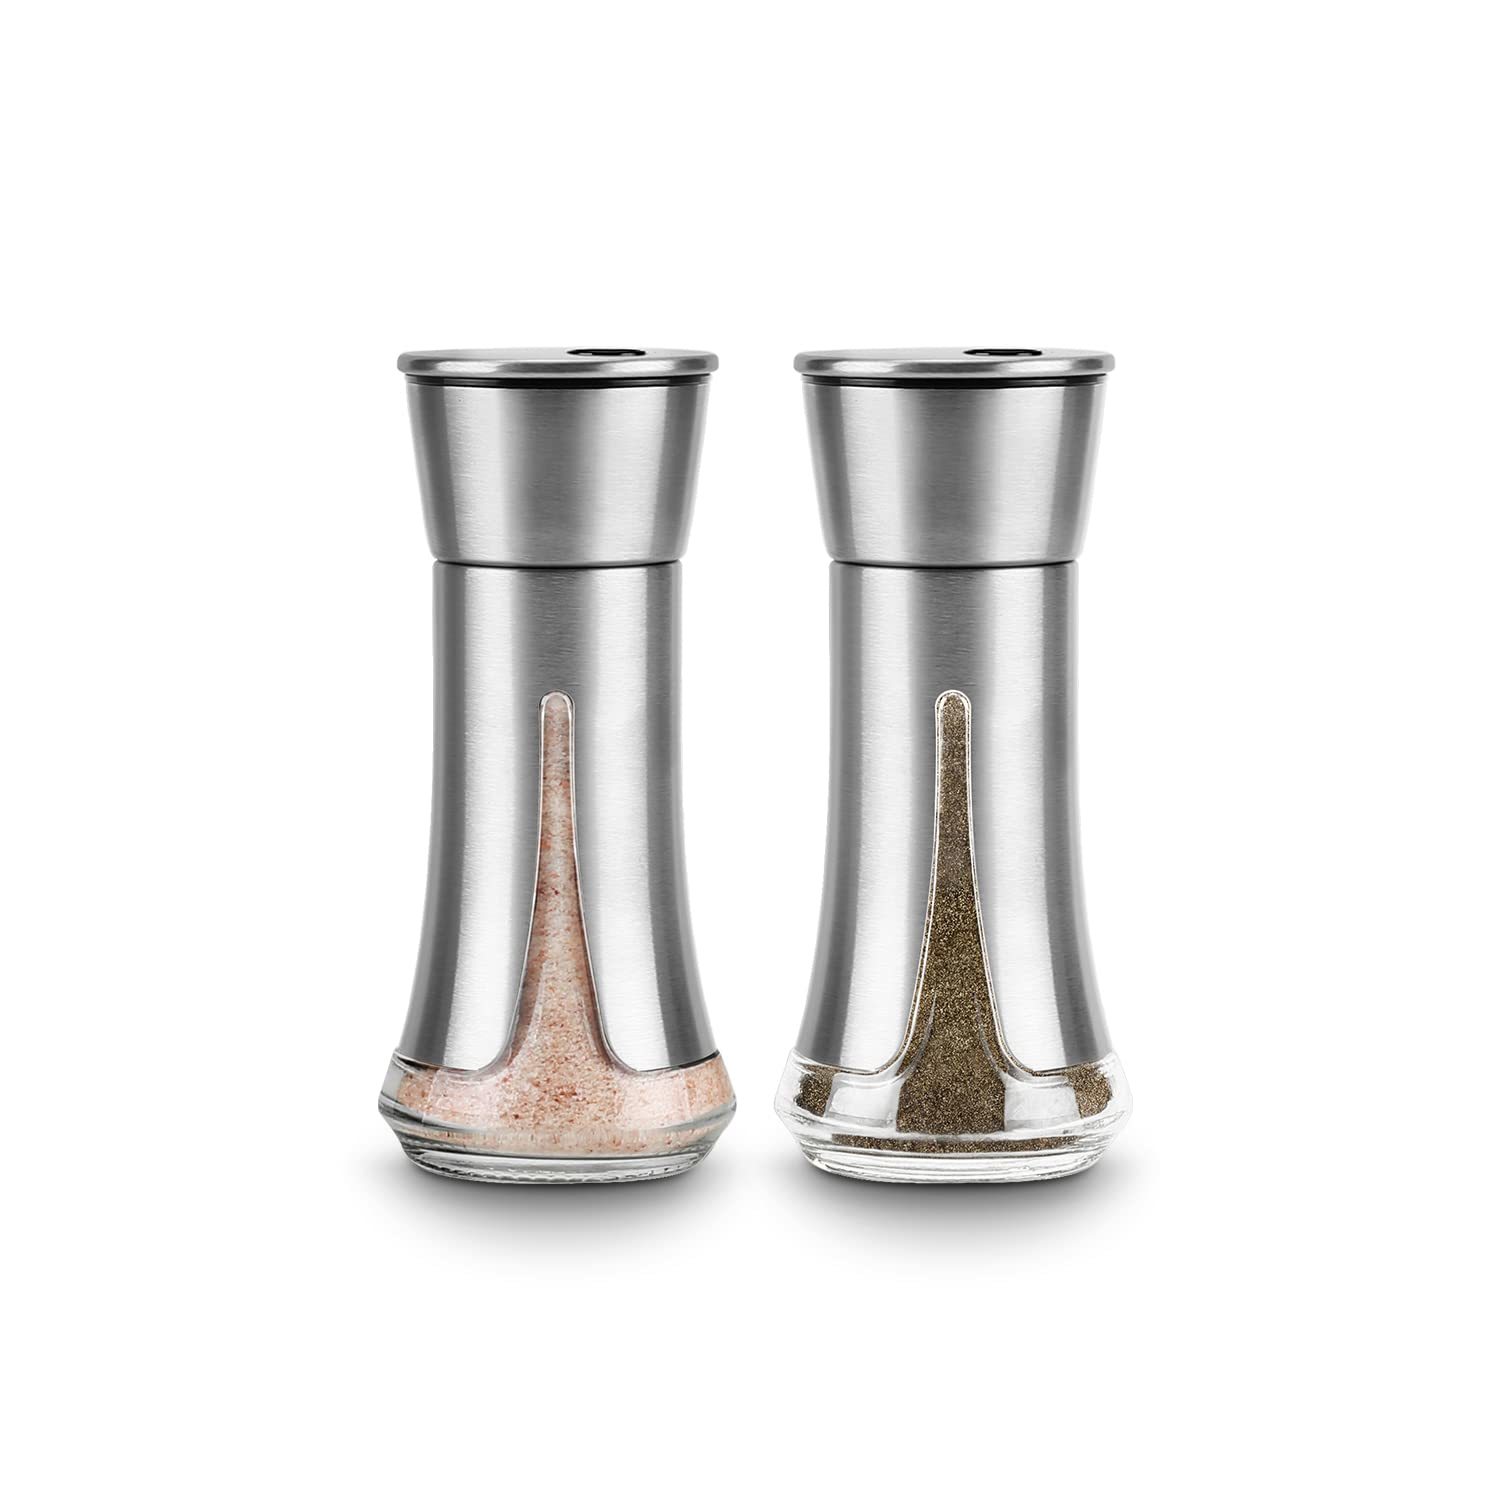 Primary image for Salt And Pepper Shakers By - Salt Shaker With Adjustable Pour Holes -Salt And Pe